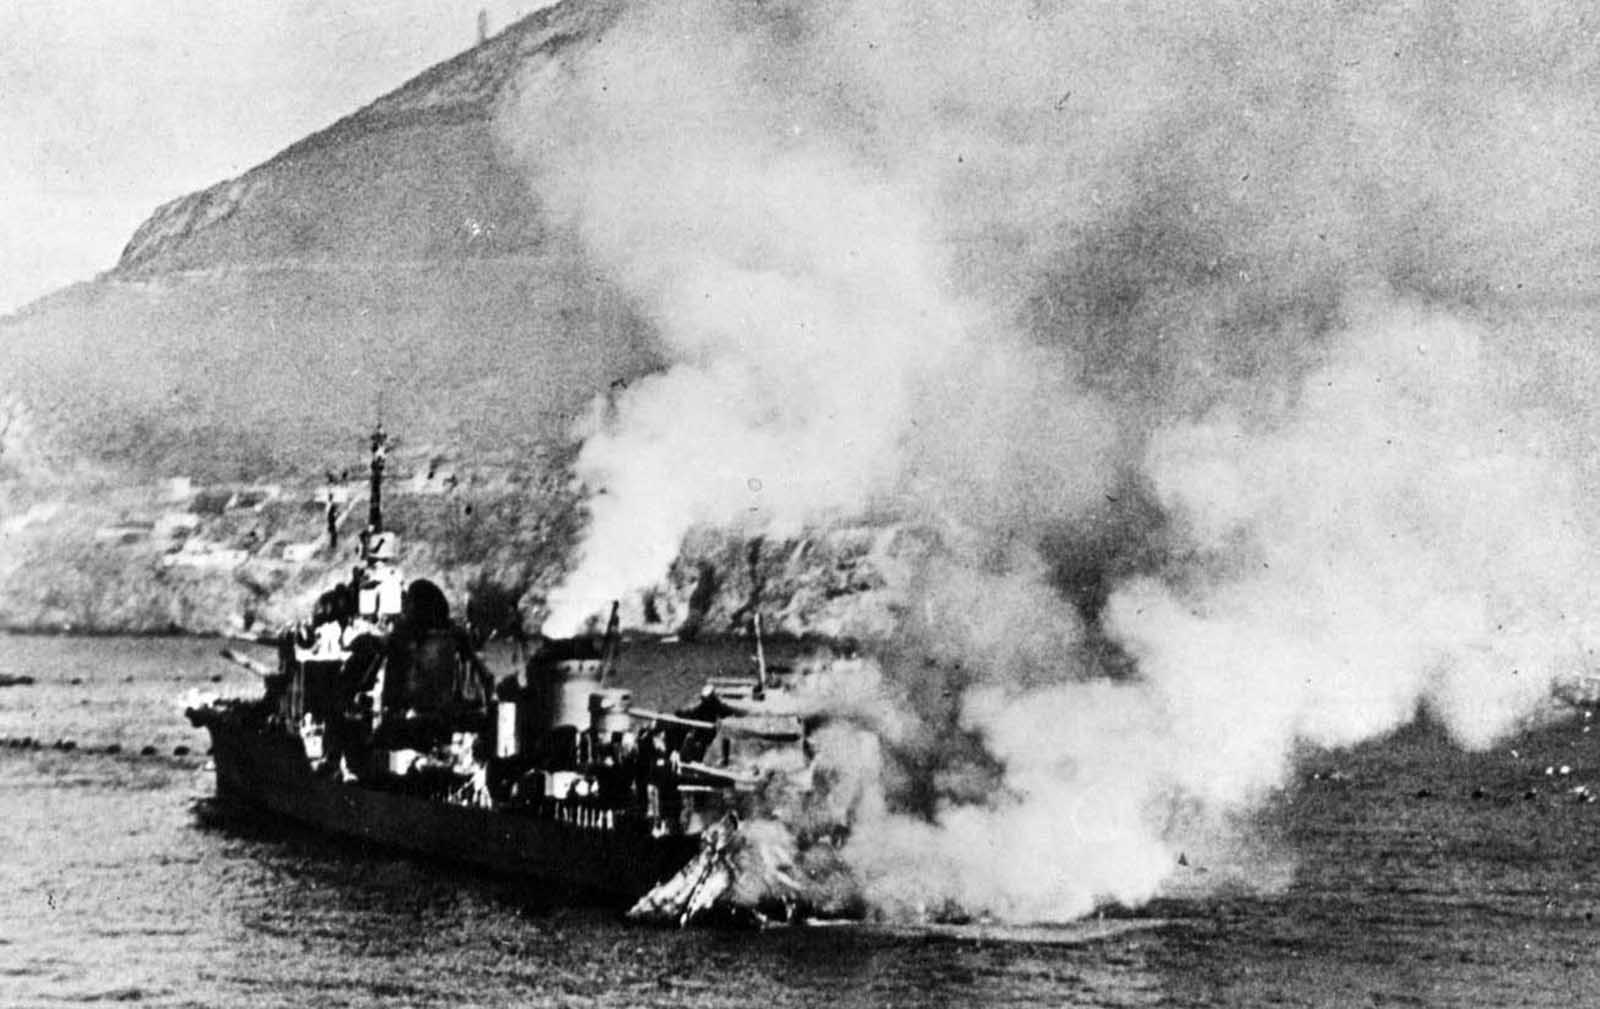 French destroyer Mogador, in flames after being shelled during the British attack on Mers-el-Kebir, French Algeria, on July 3, 1940. After France signed an armistice with Germany, the British government moved to destroy what it could of the French Navy, trying to prevent the ships from falling into German hands. Several ships were badly damaged, one sunk, and 1,297 French sailors were killed in the attack.